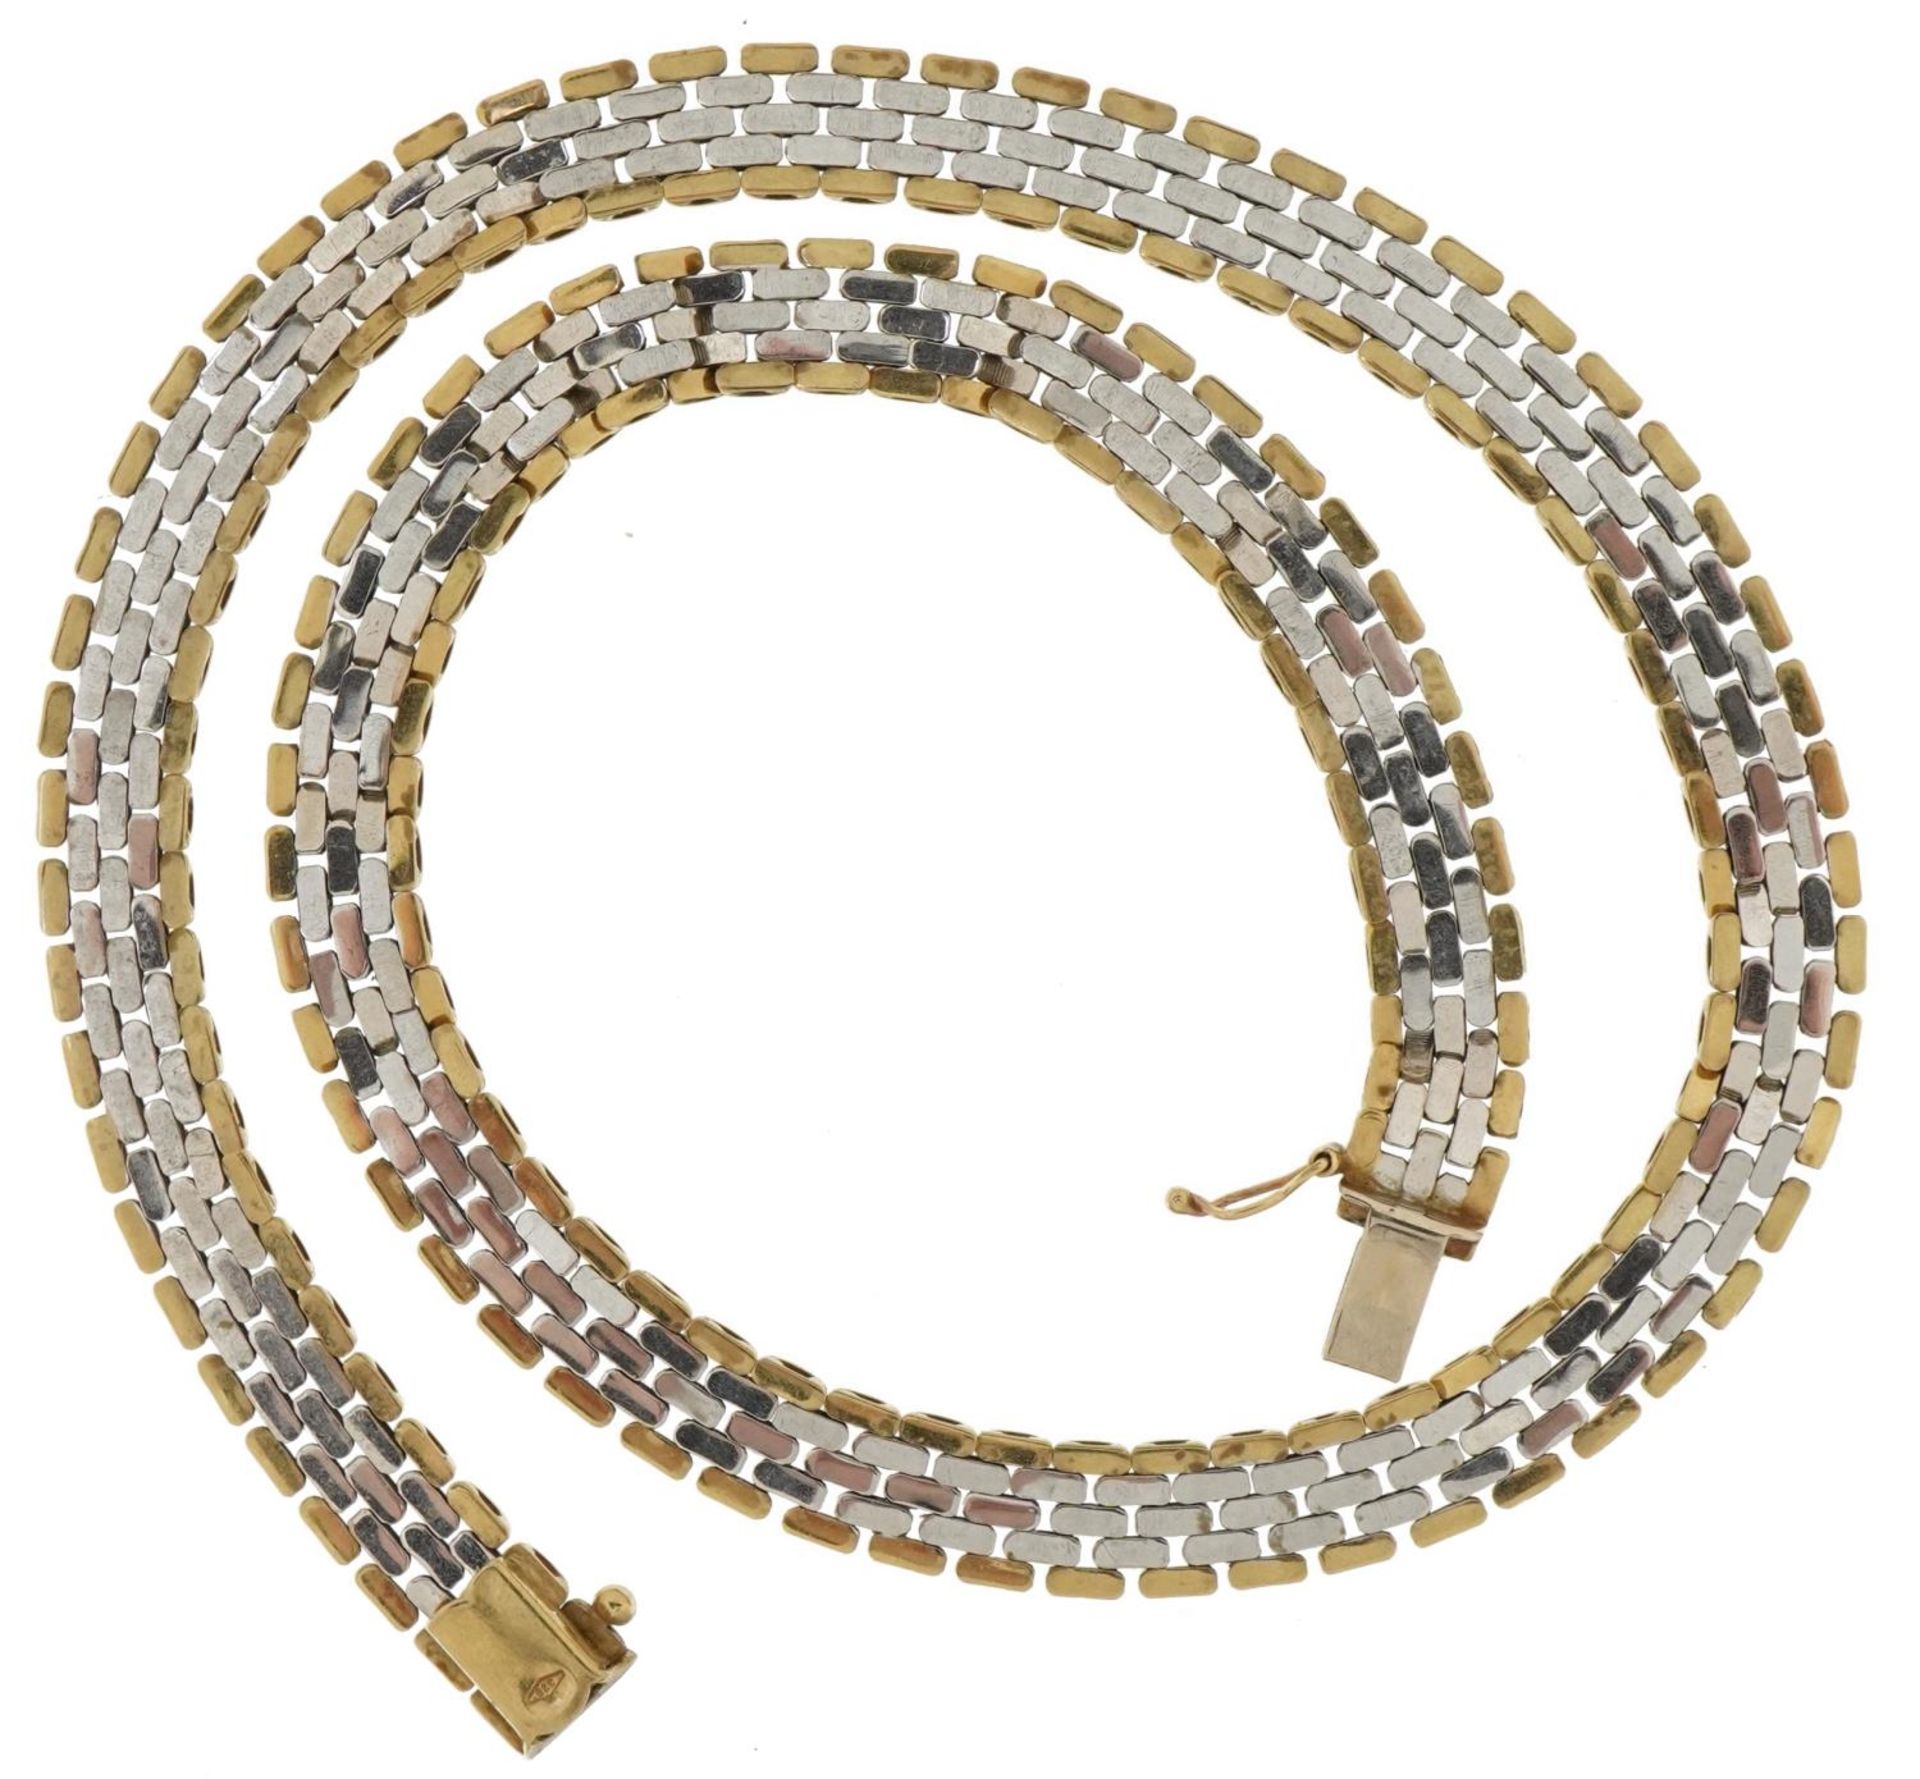 9ct two tone gold watch strap design necklace, 40cm in length, 25.5g : For further information on - Image 3 of 4